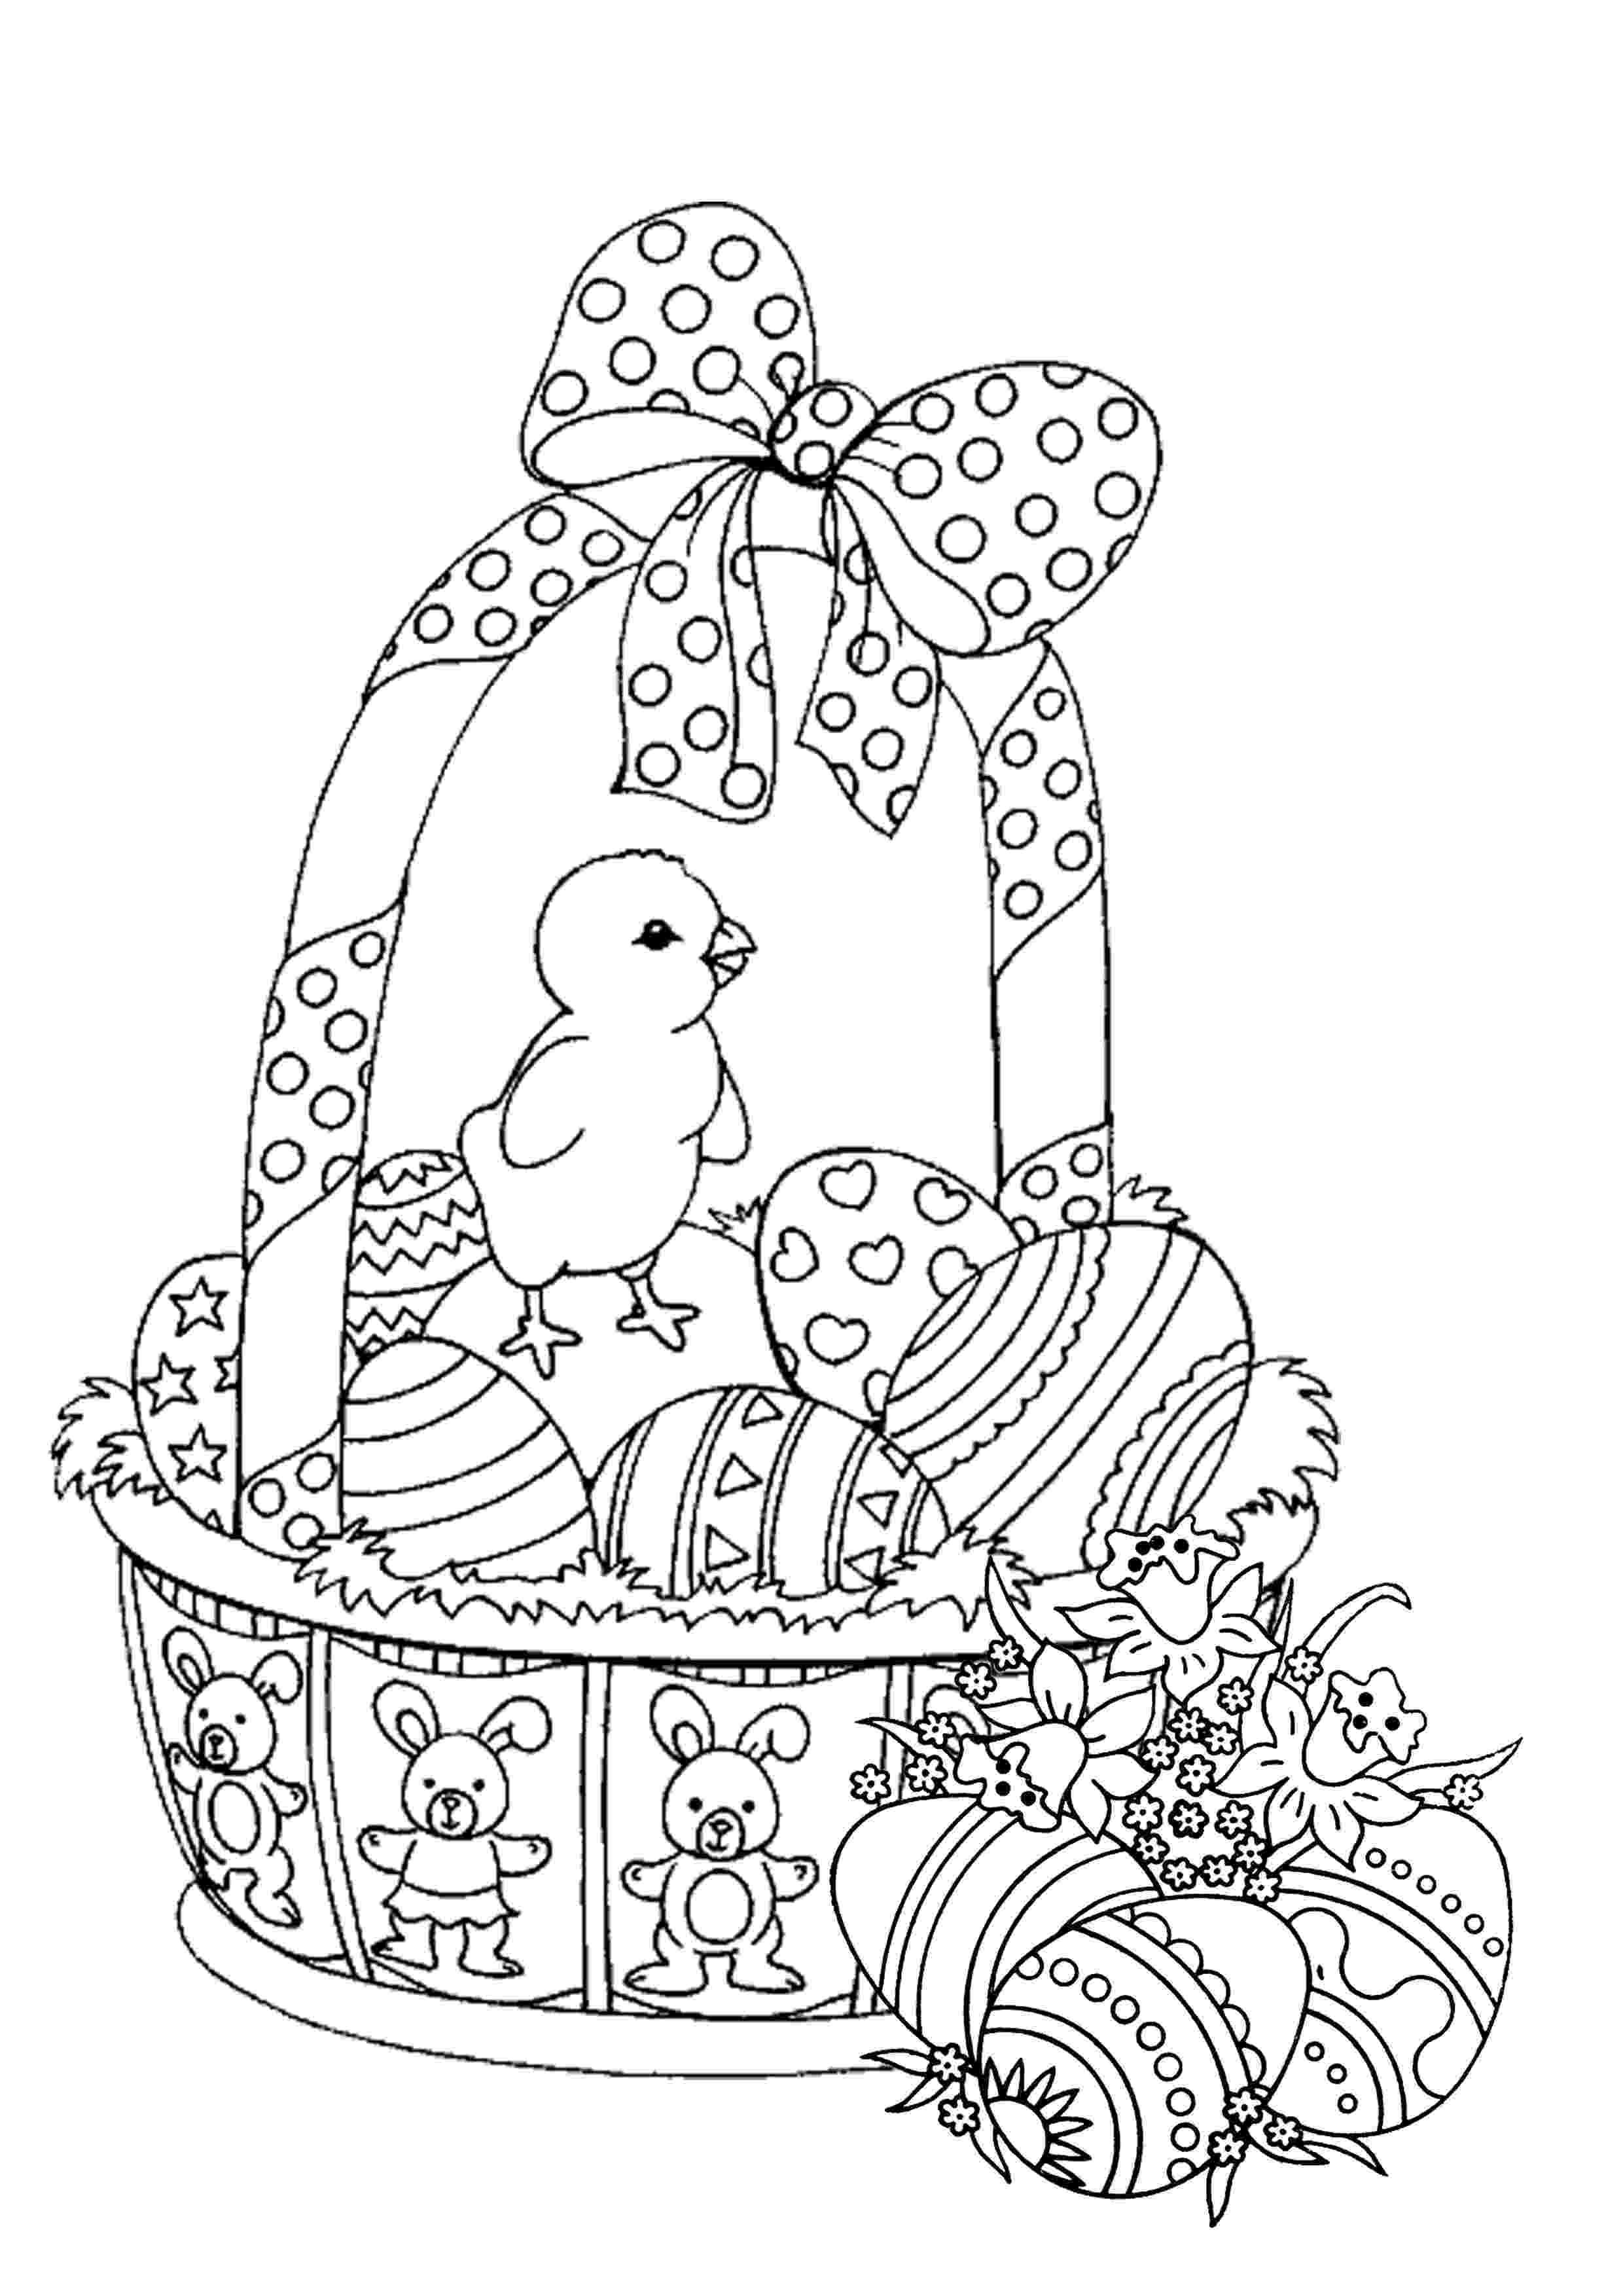 easter colouring pages printable for adults free easter coloring pages happiness is homemade easter adults colouring printable for pages 